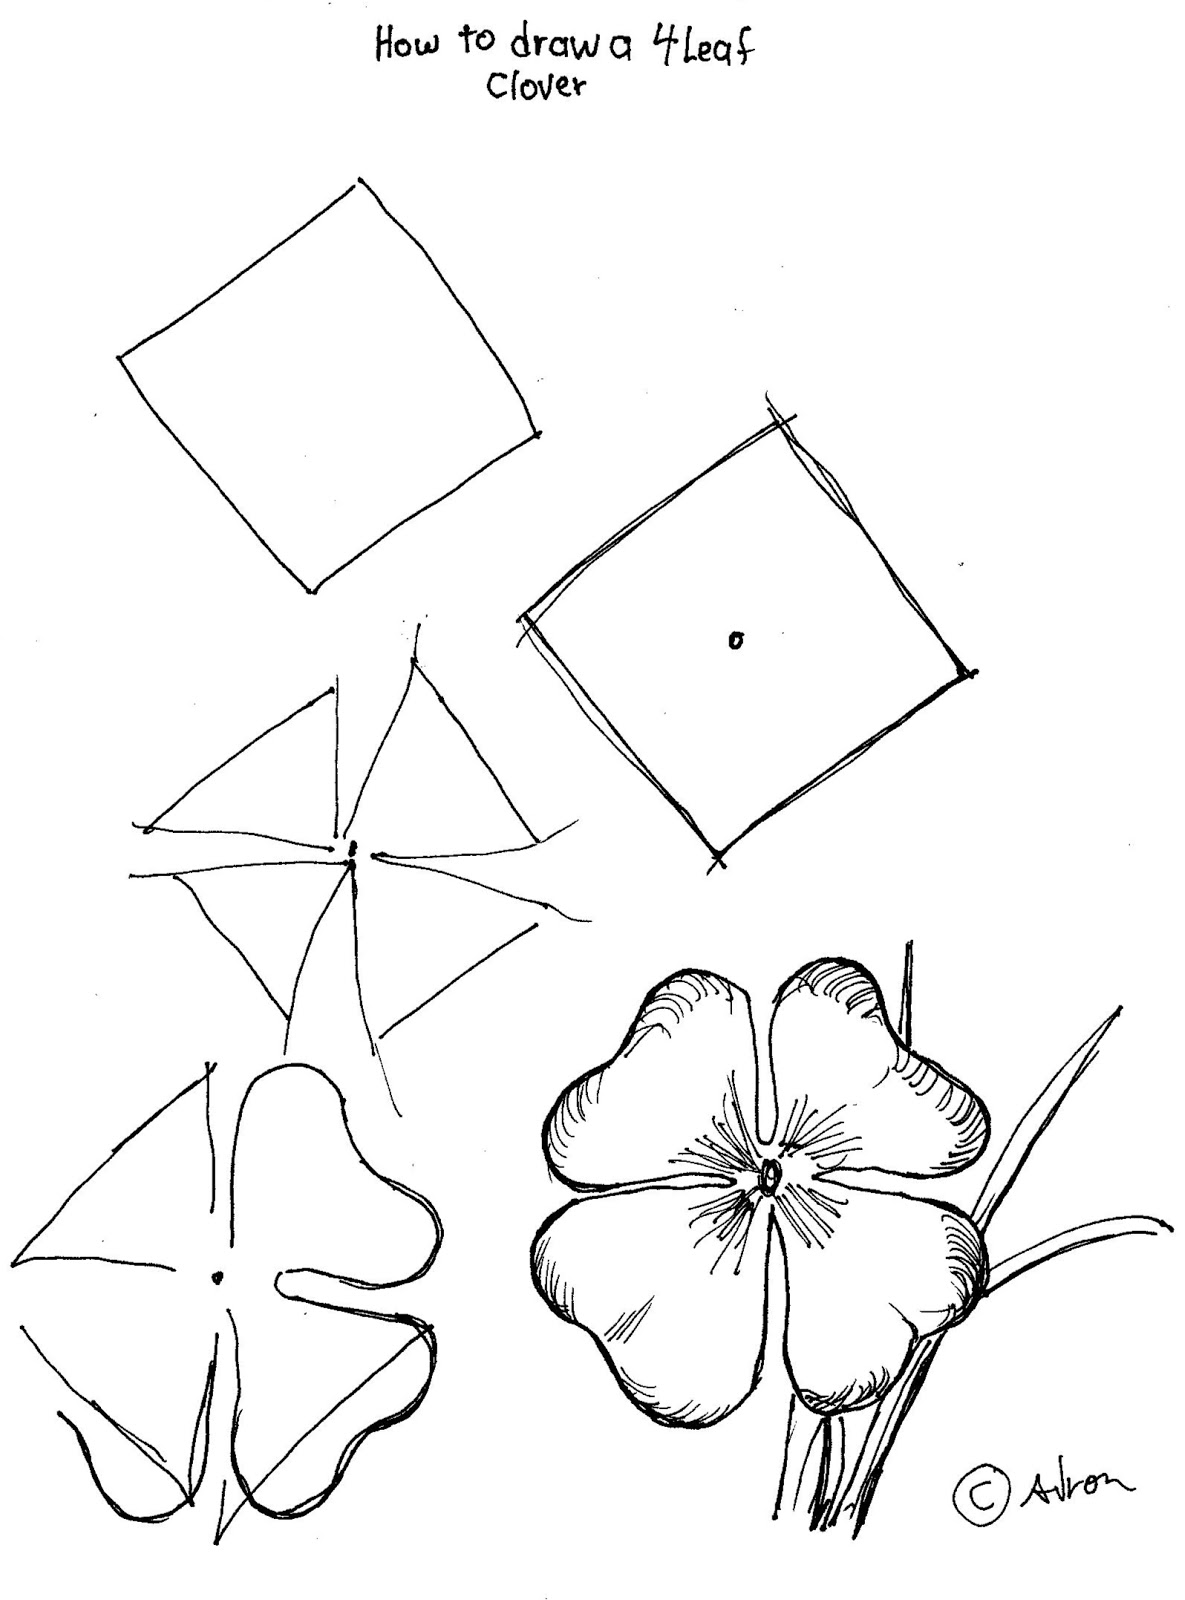 How to Draw Worksheets for The Young Artist: How to Draw a Four Leaf